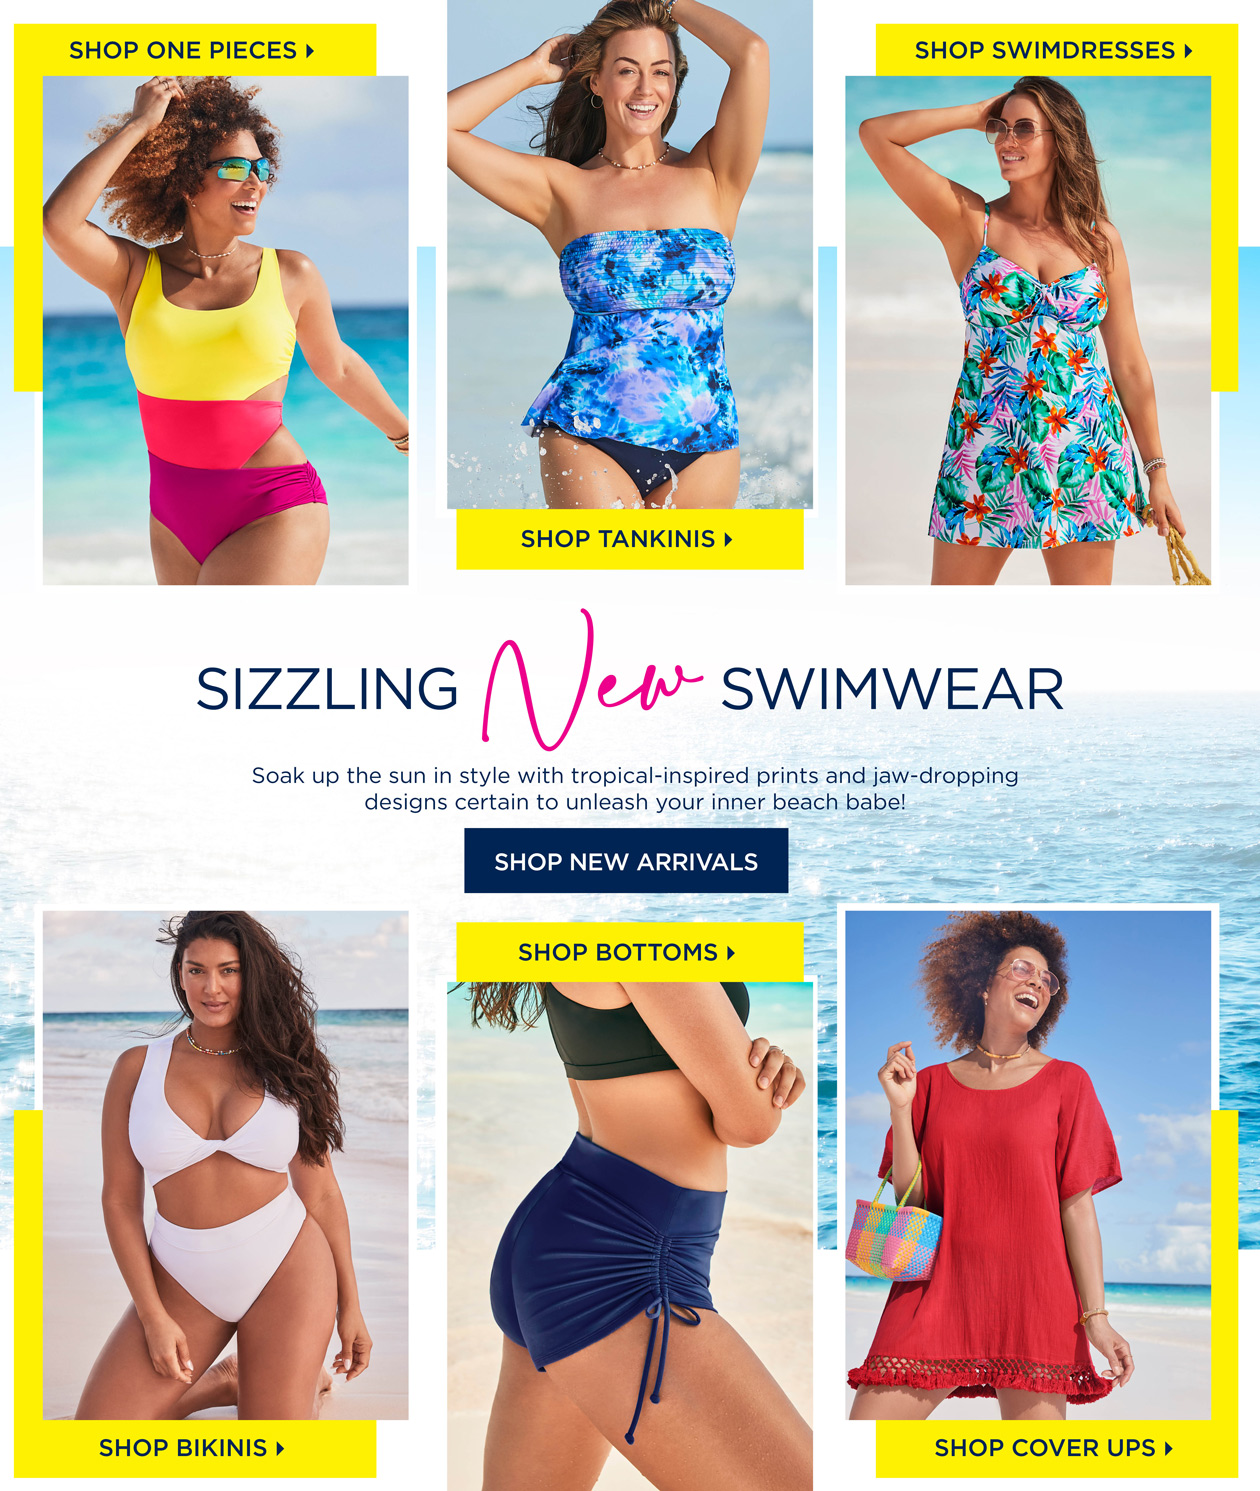 SHOP SIZZLING NEW SWIMWEAR! Soak up the sun in style with tropical-inspired prints and jaw-dropping designs certain to unleash your inner beach babe!